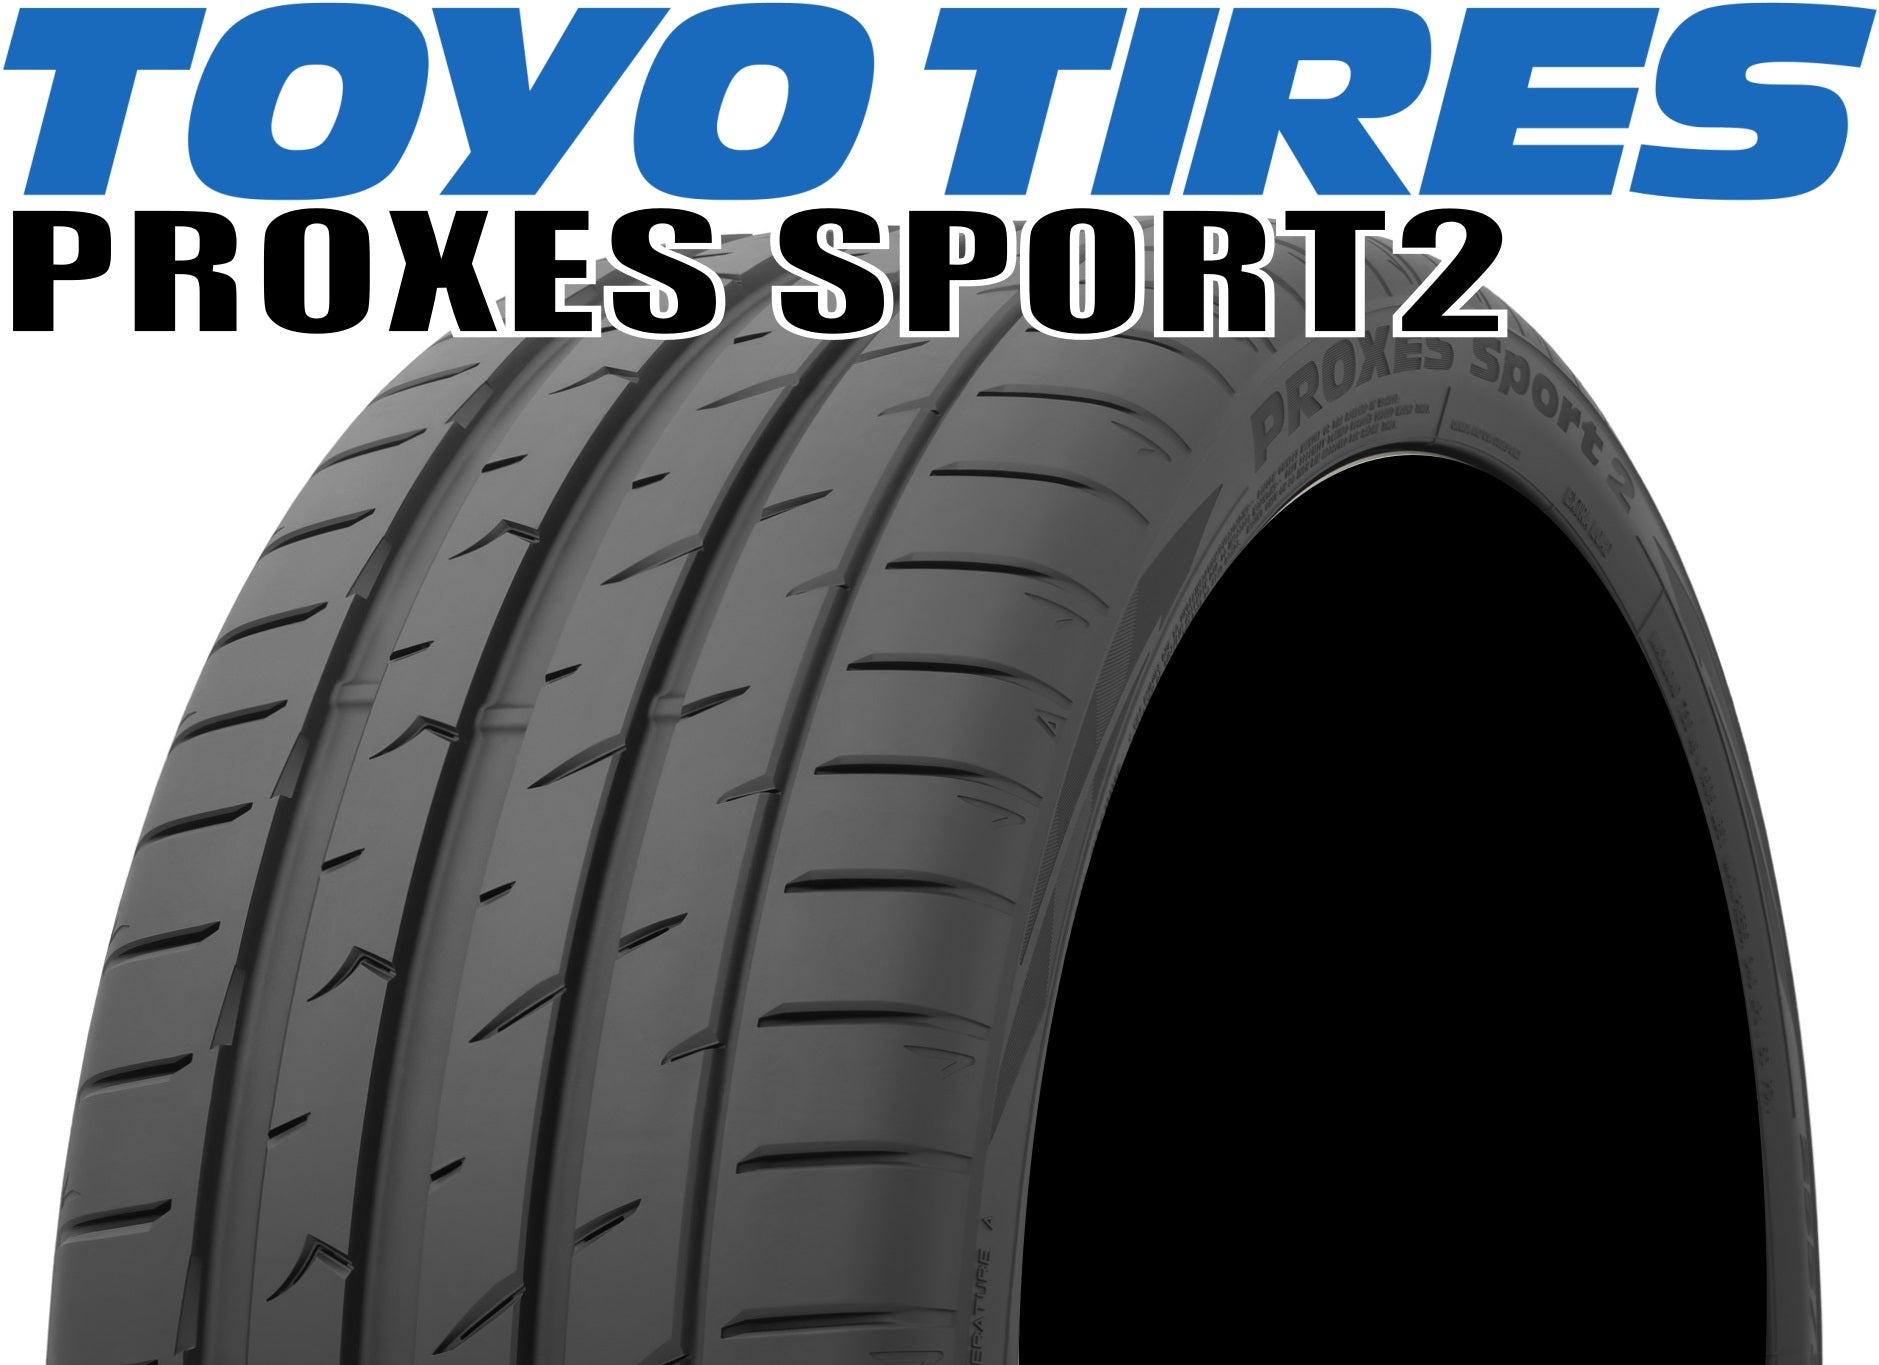 TOYO TIRES PROXES SPORT2(トーヨー プロクセススポーツ) 255/30ZR19 91Y 255/30-19